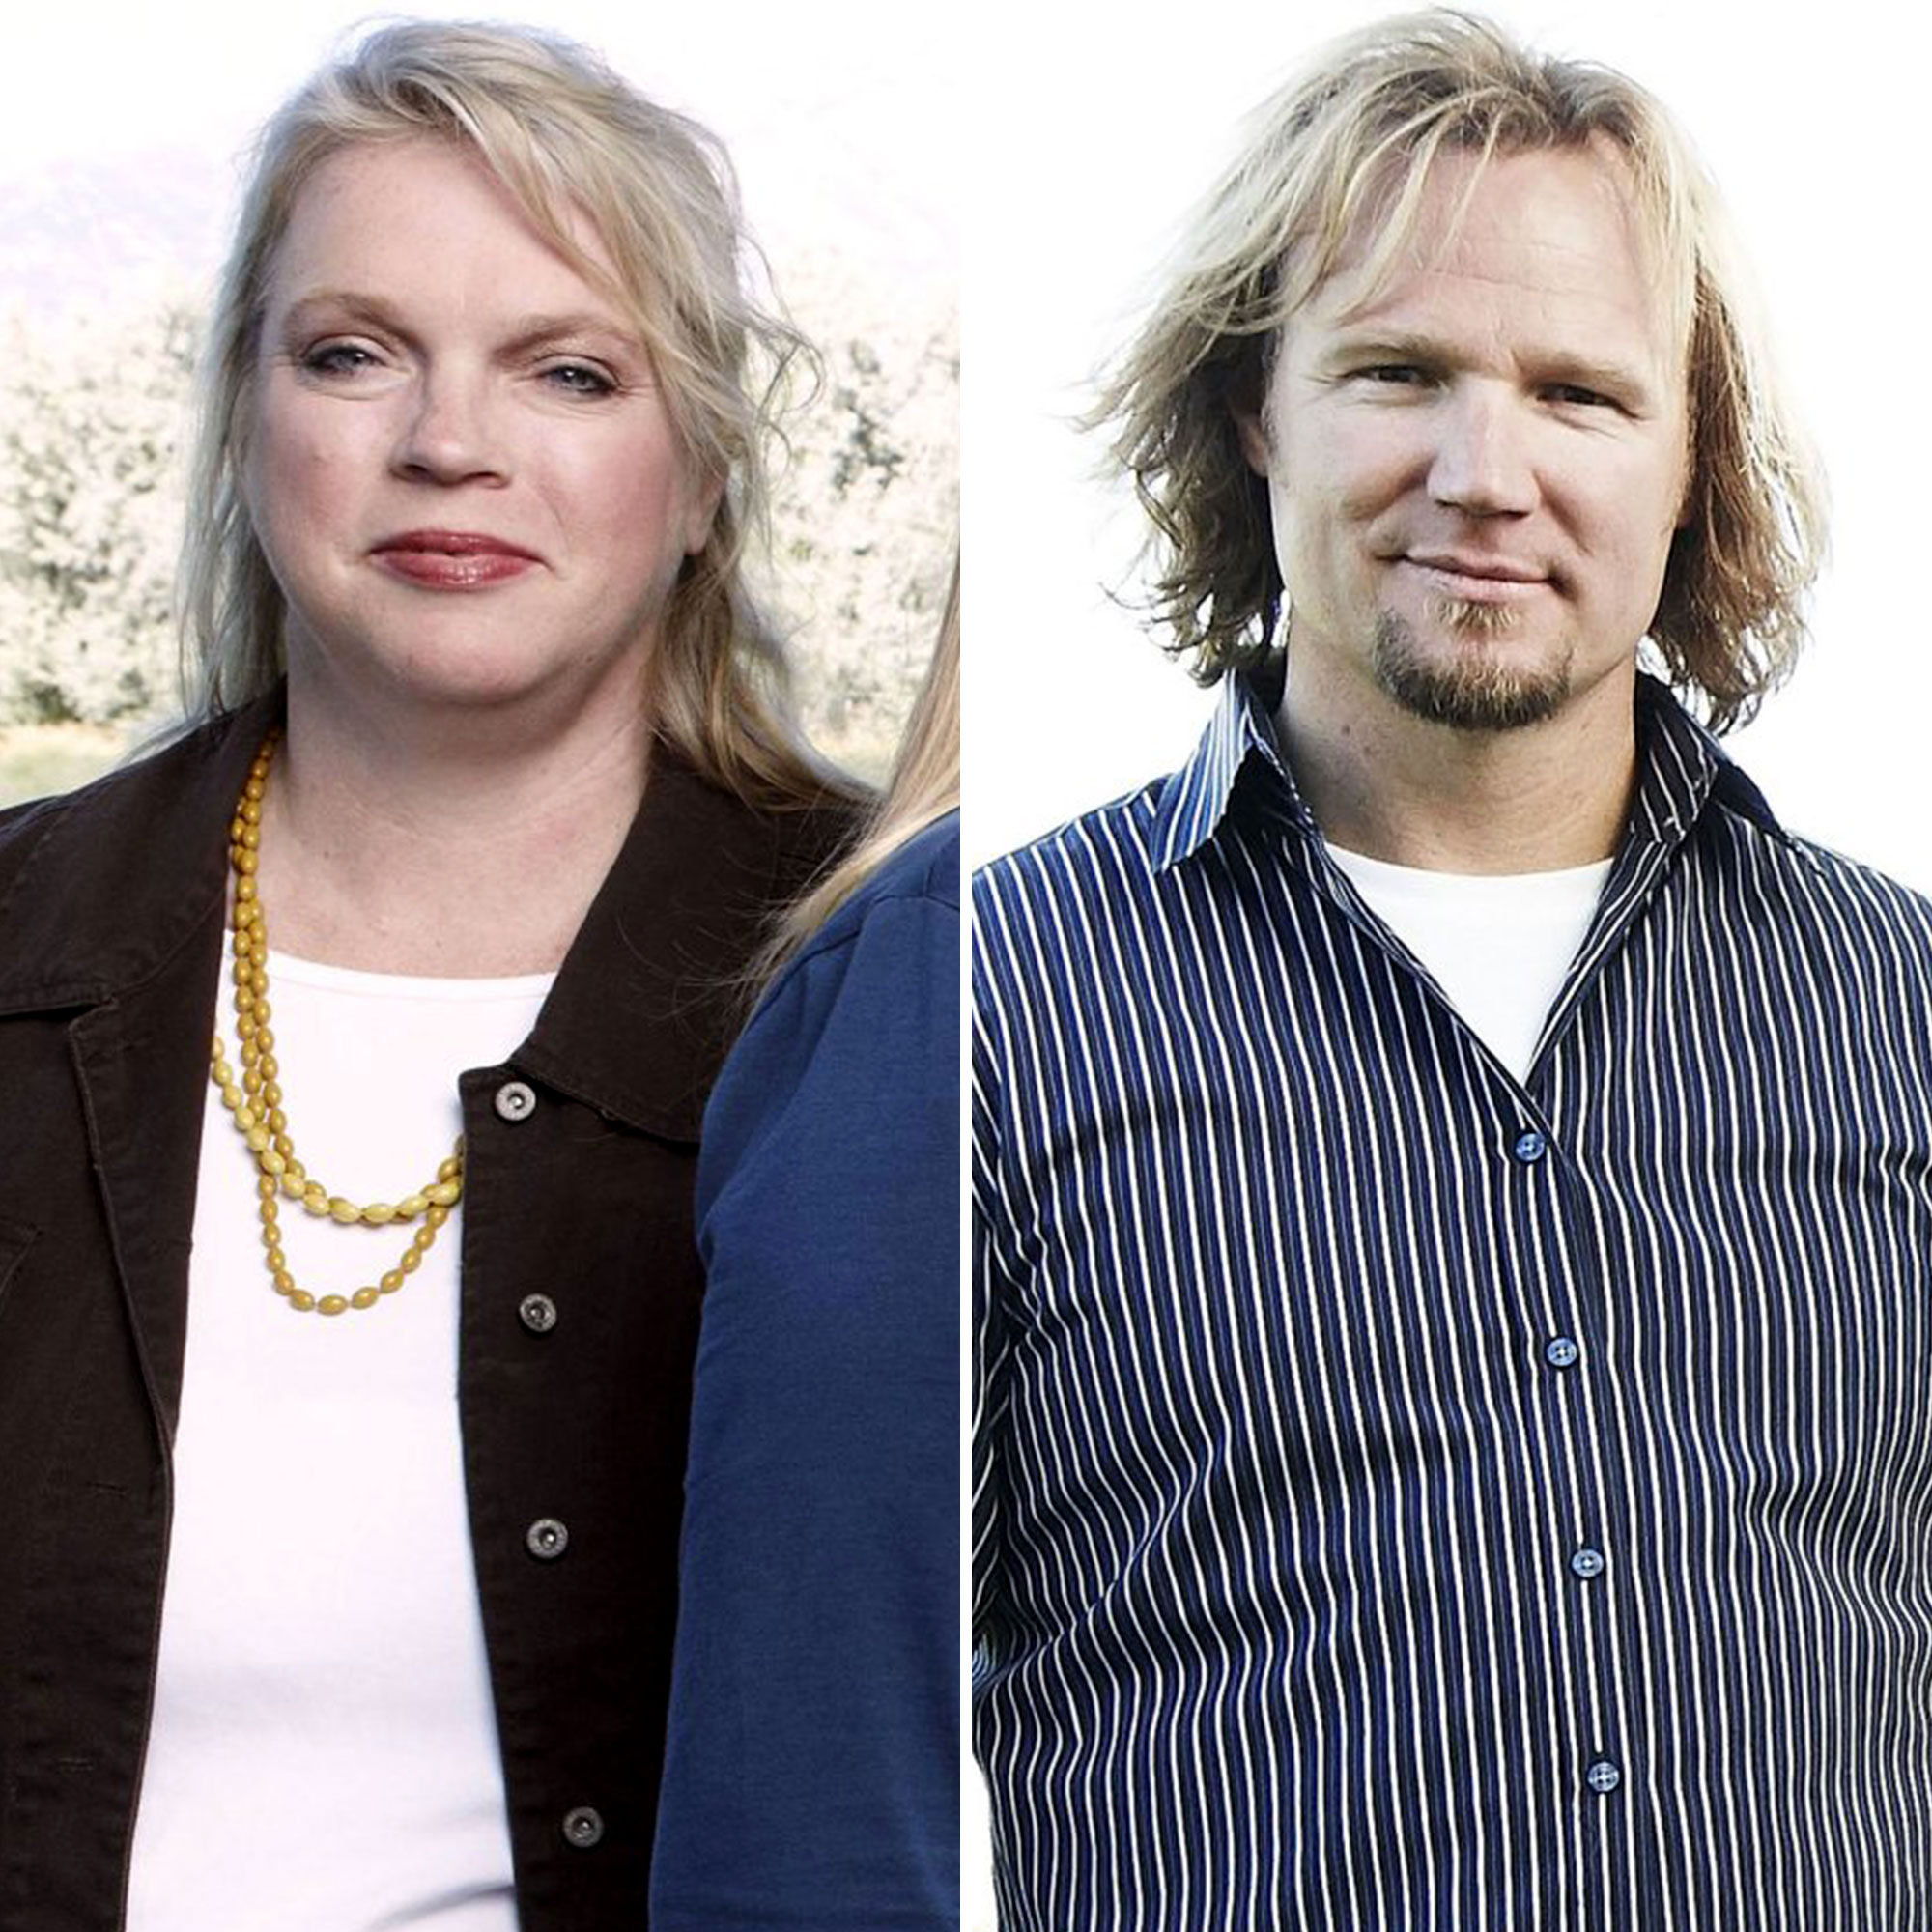 Sister Wives' Janelle, Kody Brown Clash Over RV Move: Video